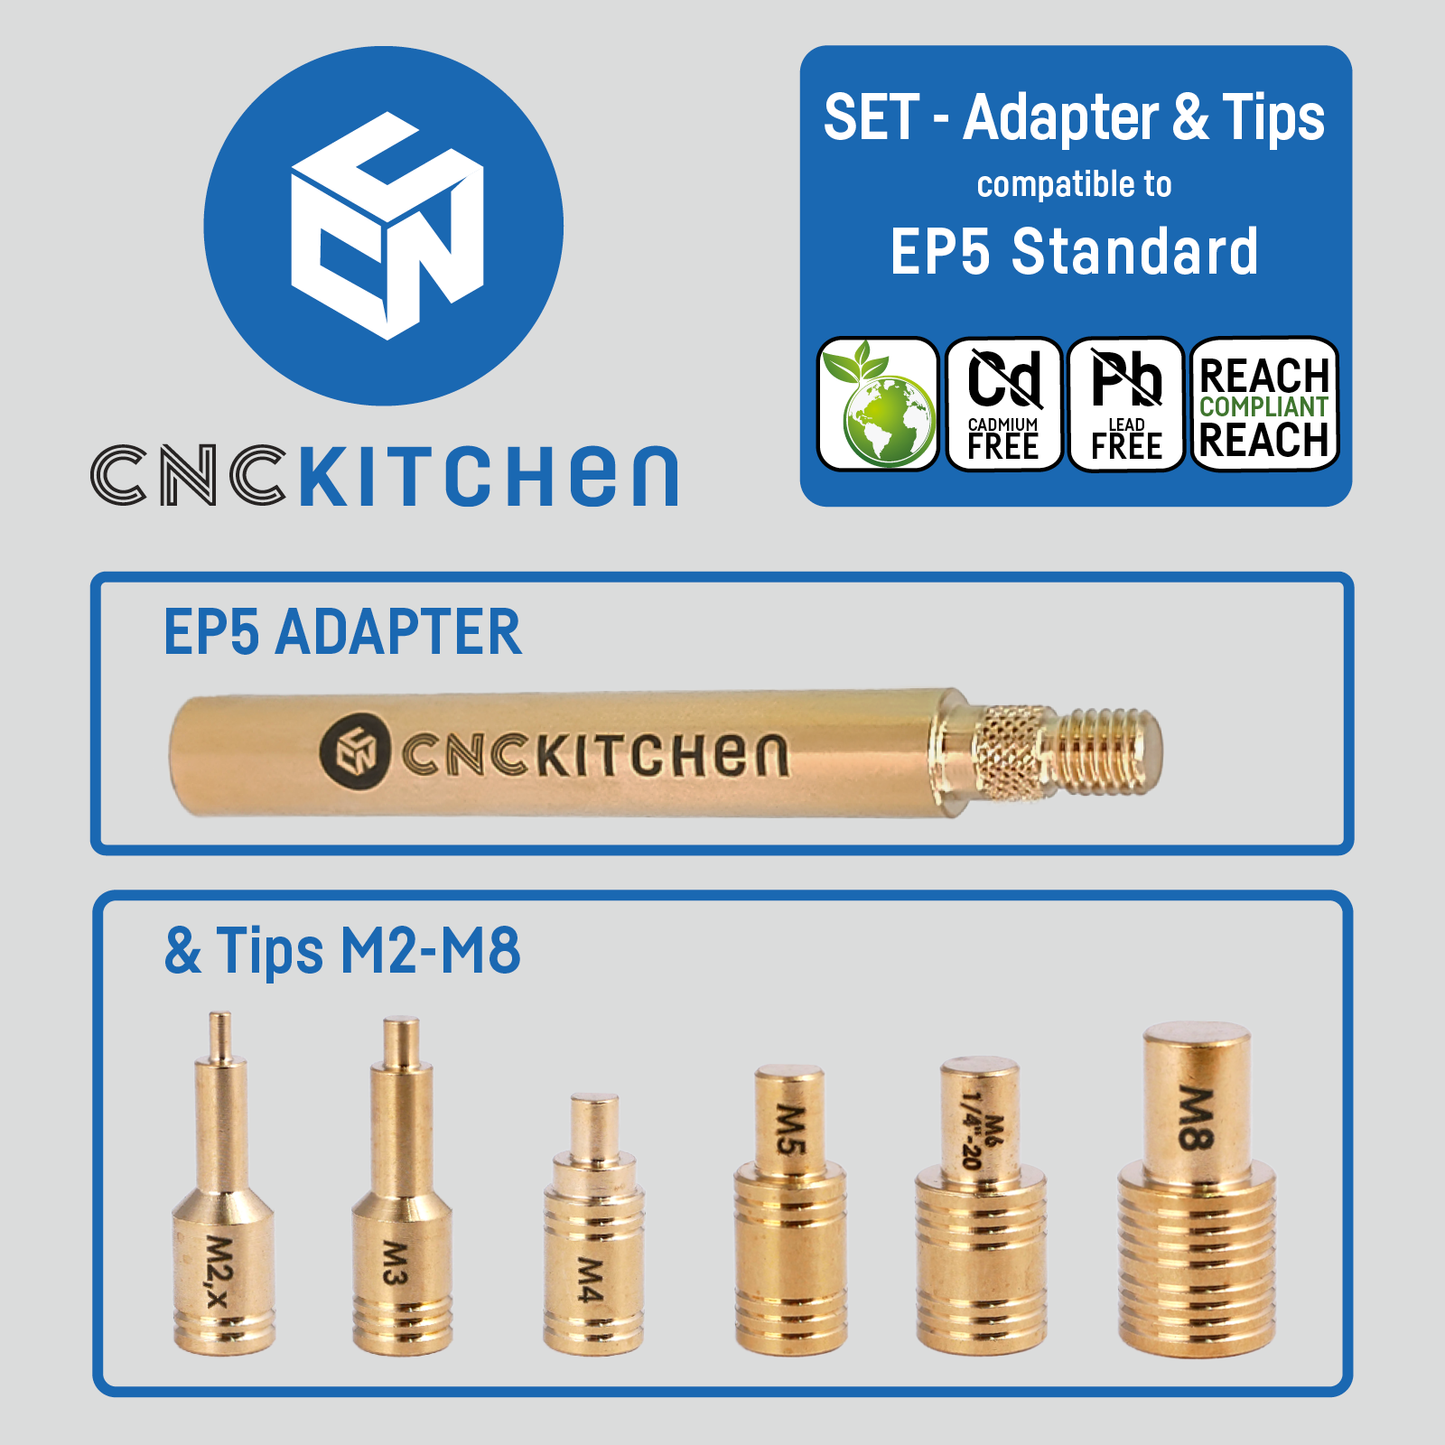 Soldering Tips SET compatible with EP5 Standard